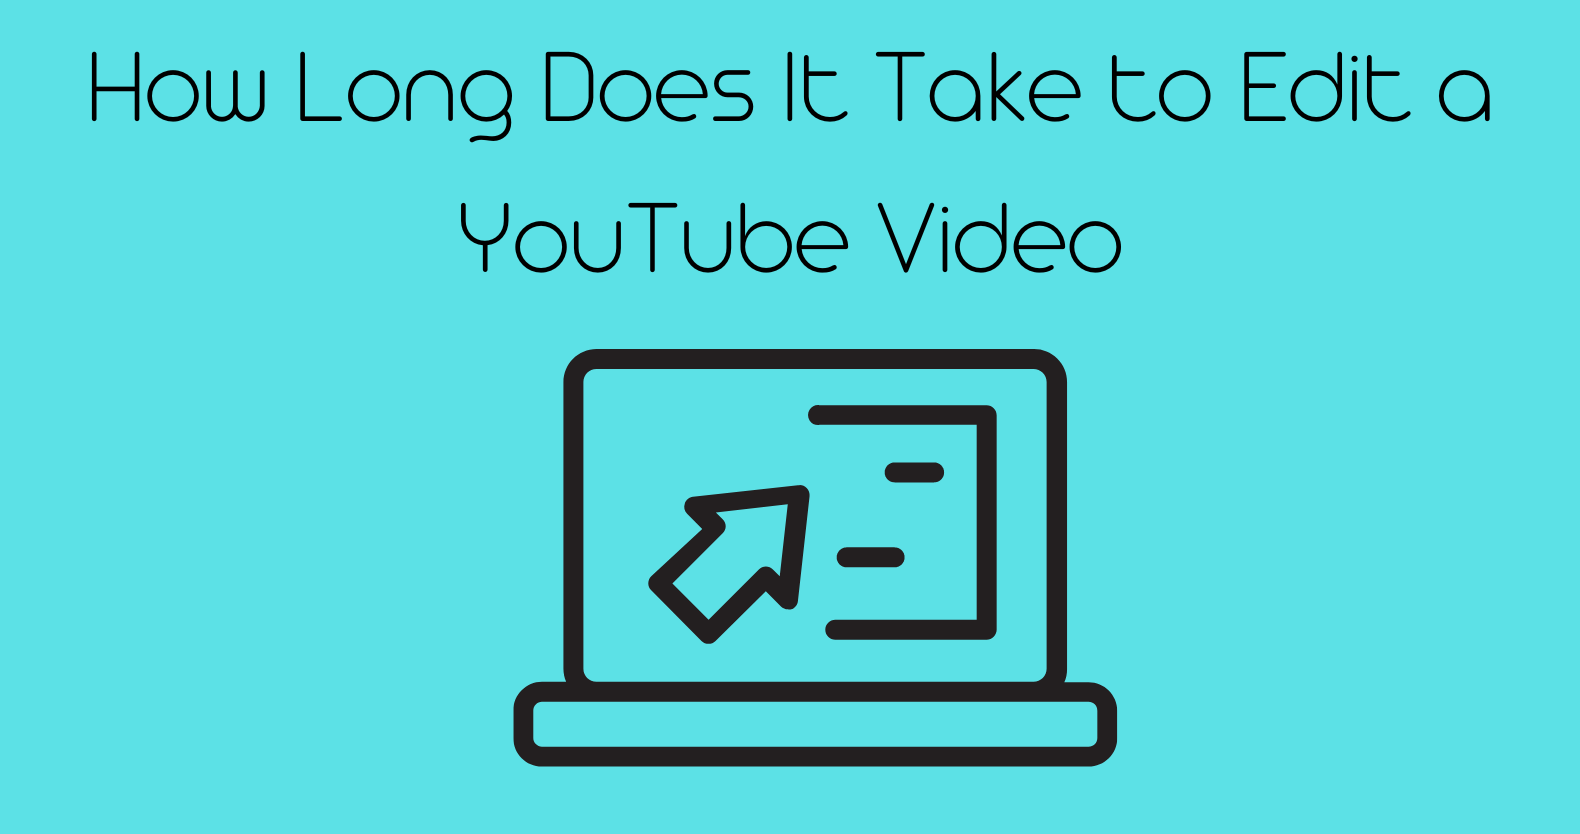 How Long Does It Take to Edit a YouTube Video